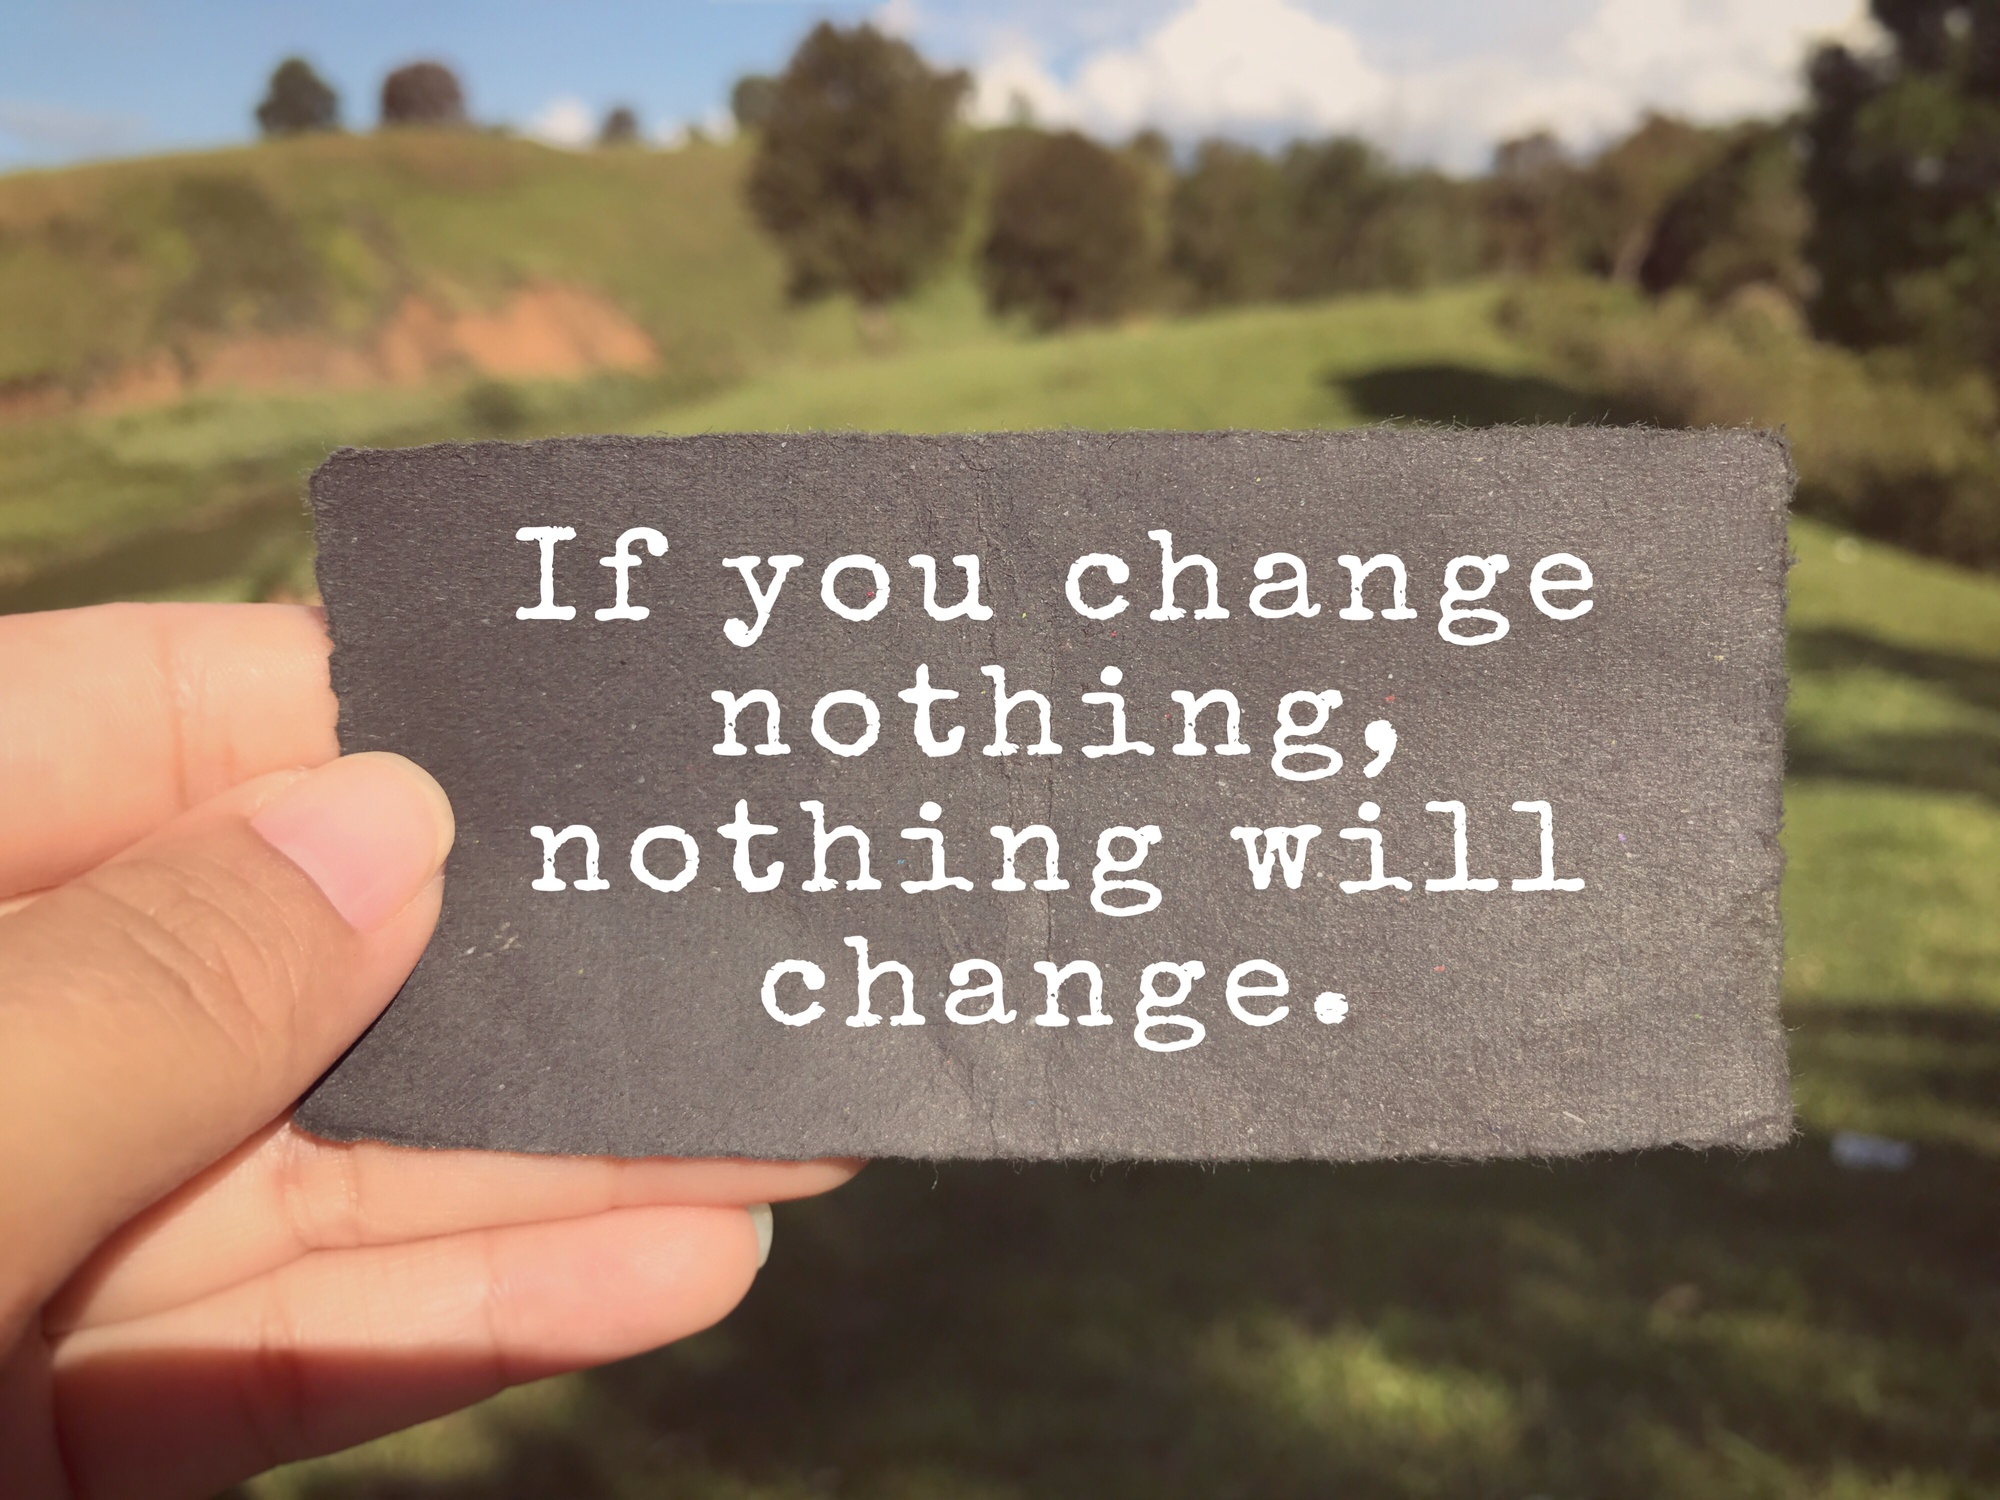 If You Change Nothing, Nothing Will Change written on a paper. Blurred vintage styled background.